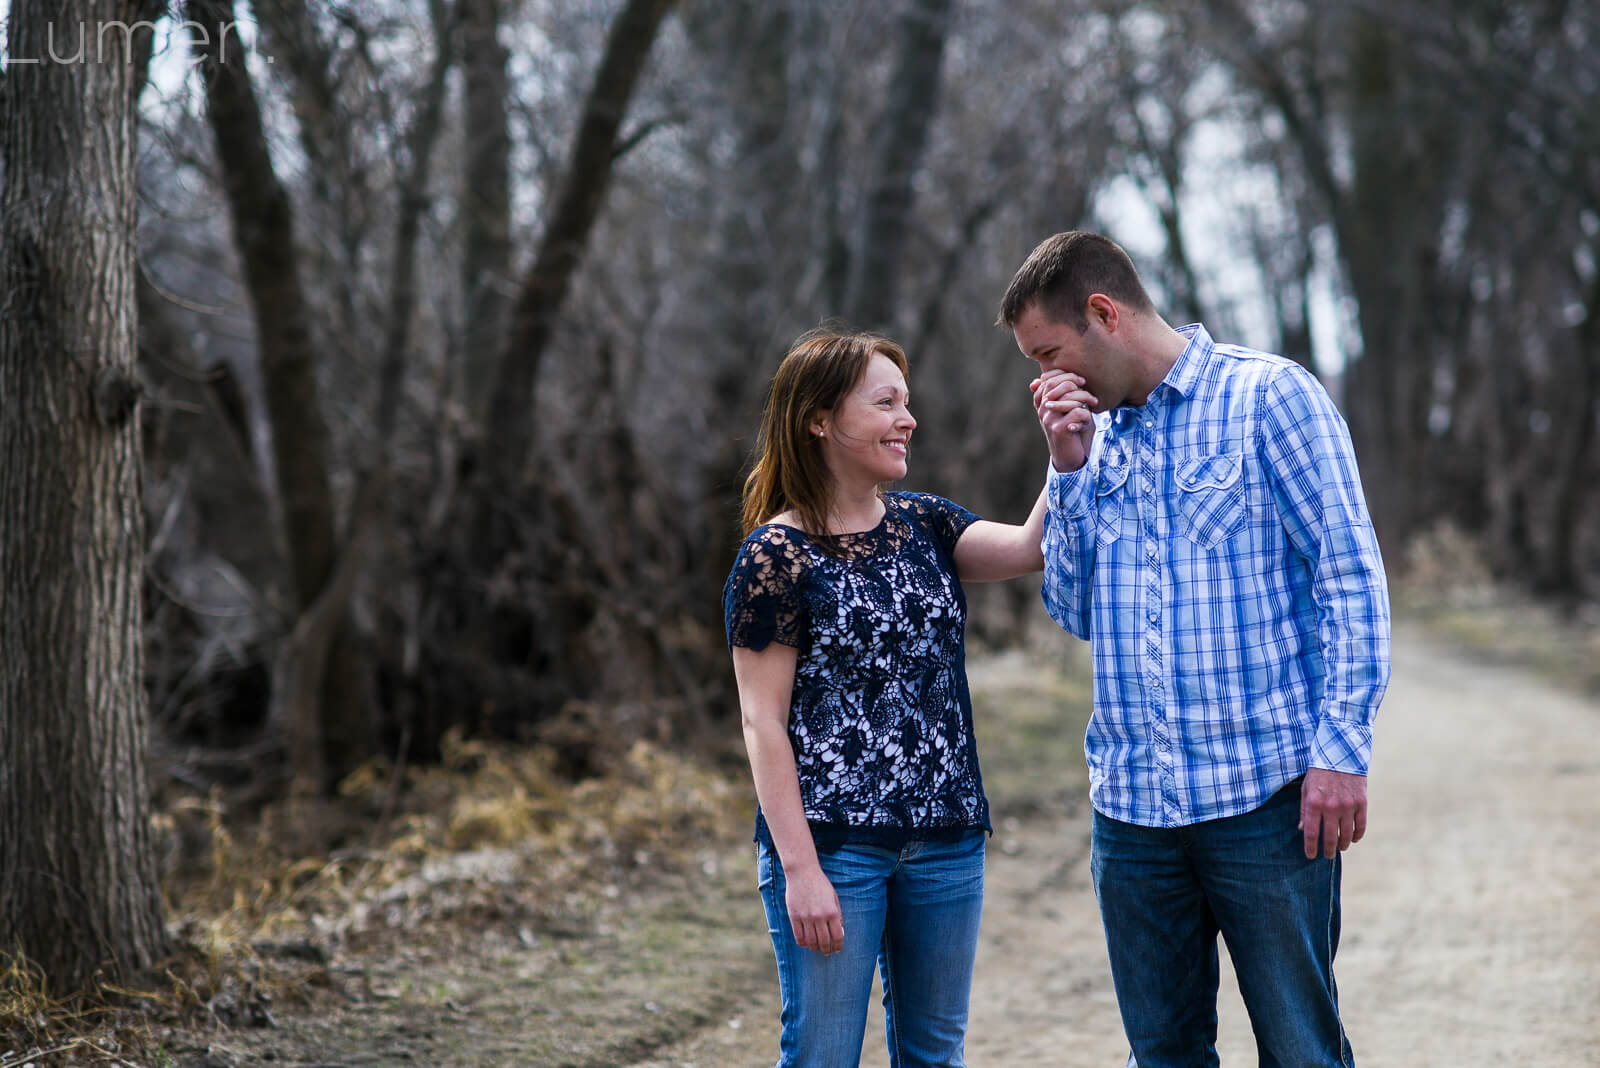 lumen photography, adventurous photography, couture, minneapolis, minnesota, fort snelling state park engagement session, family session, portraits, engagement